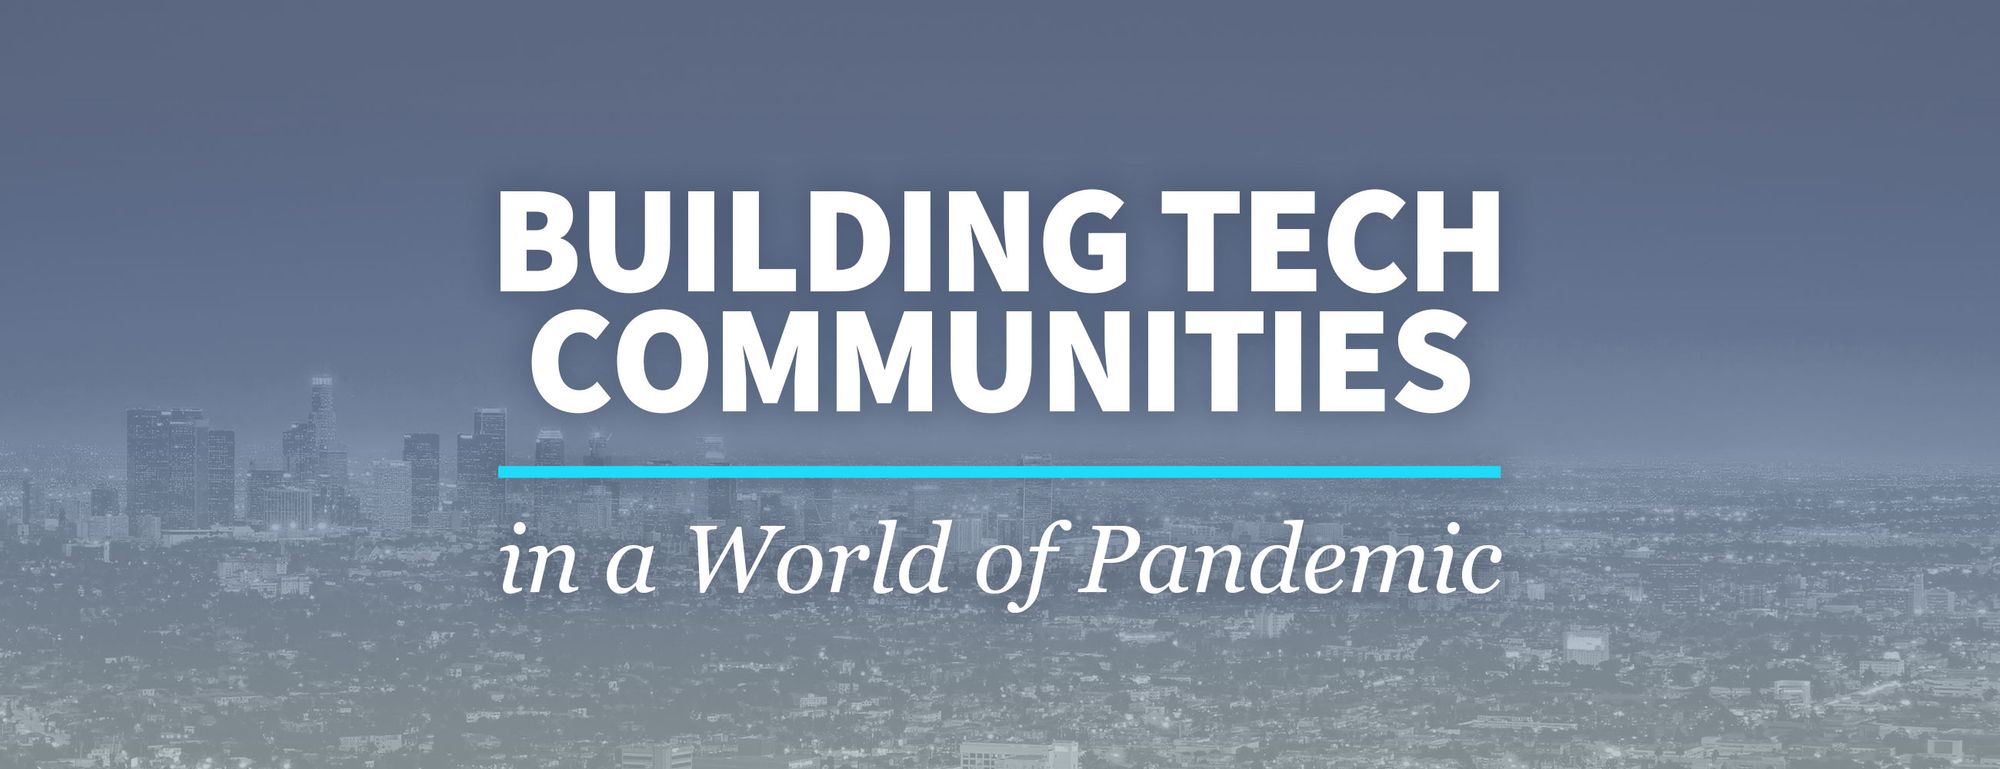 How to Build Tech Communities in a World of Pandemic